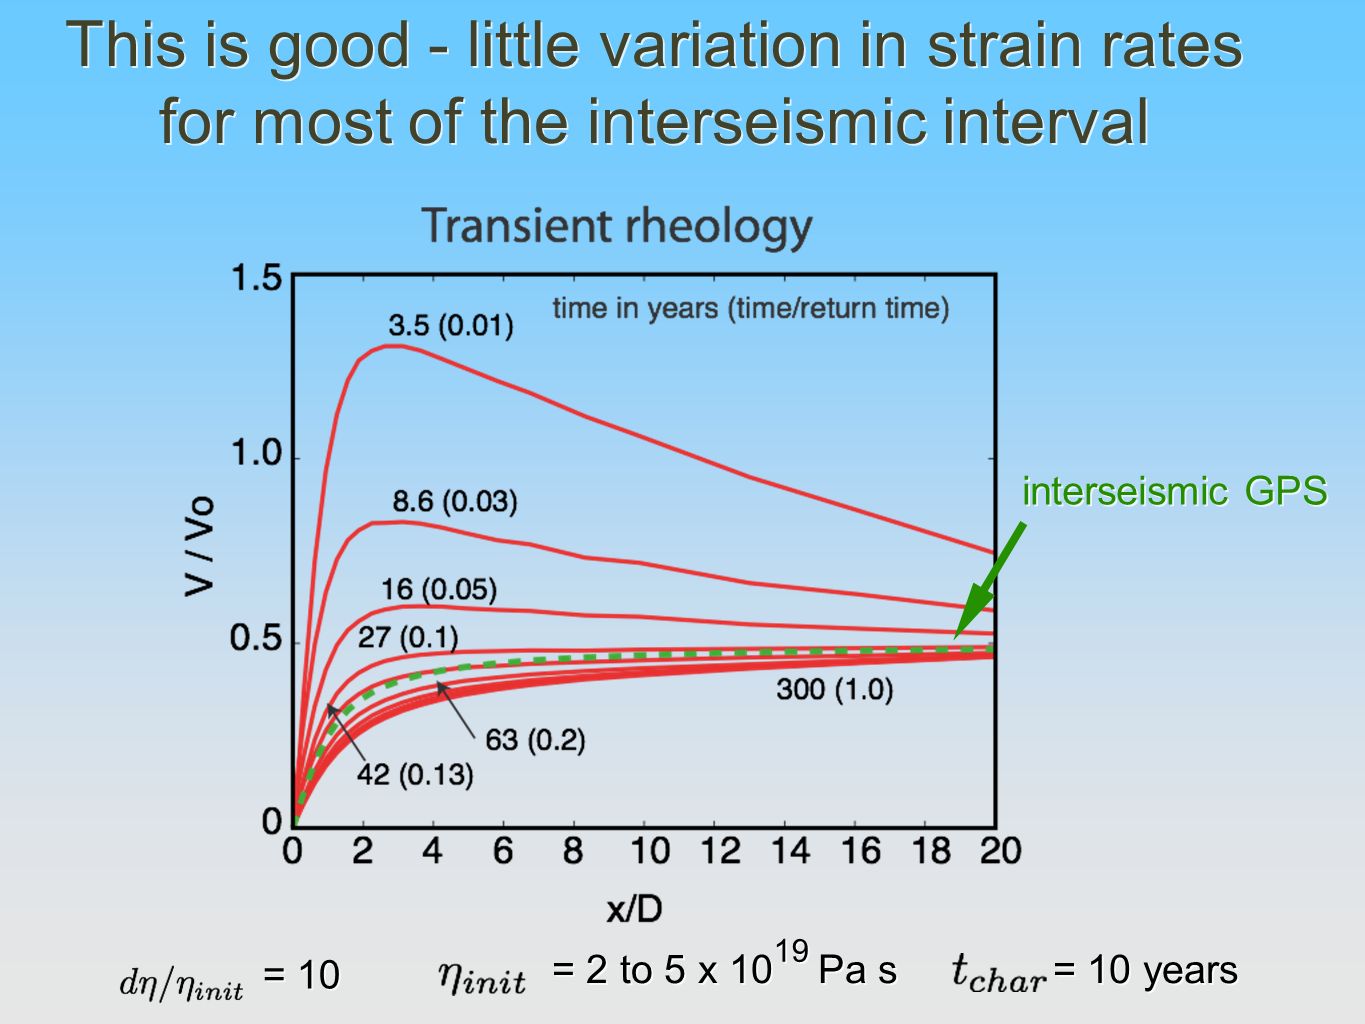 interseismic GPS = 10 = 2 to 5 x 10 Pa s = 10 years 19 This is good - little variation in strain rates for most of the interseismic interval